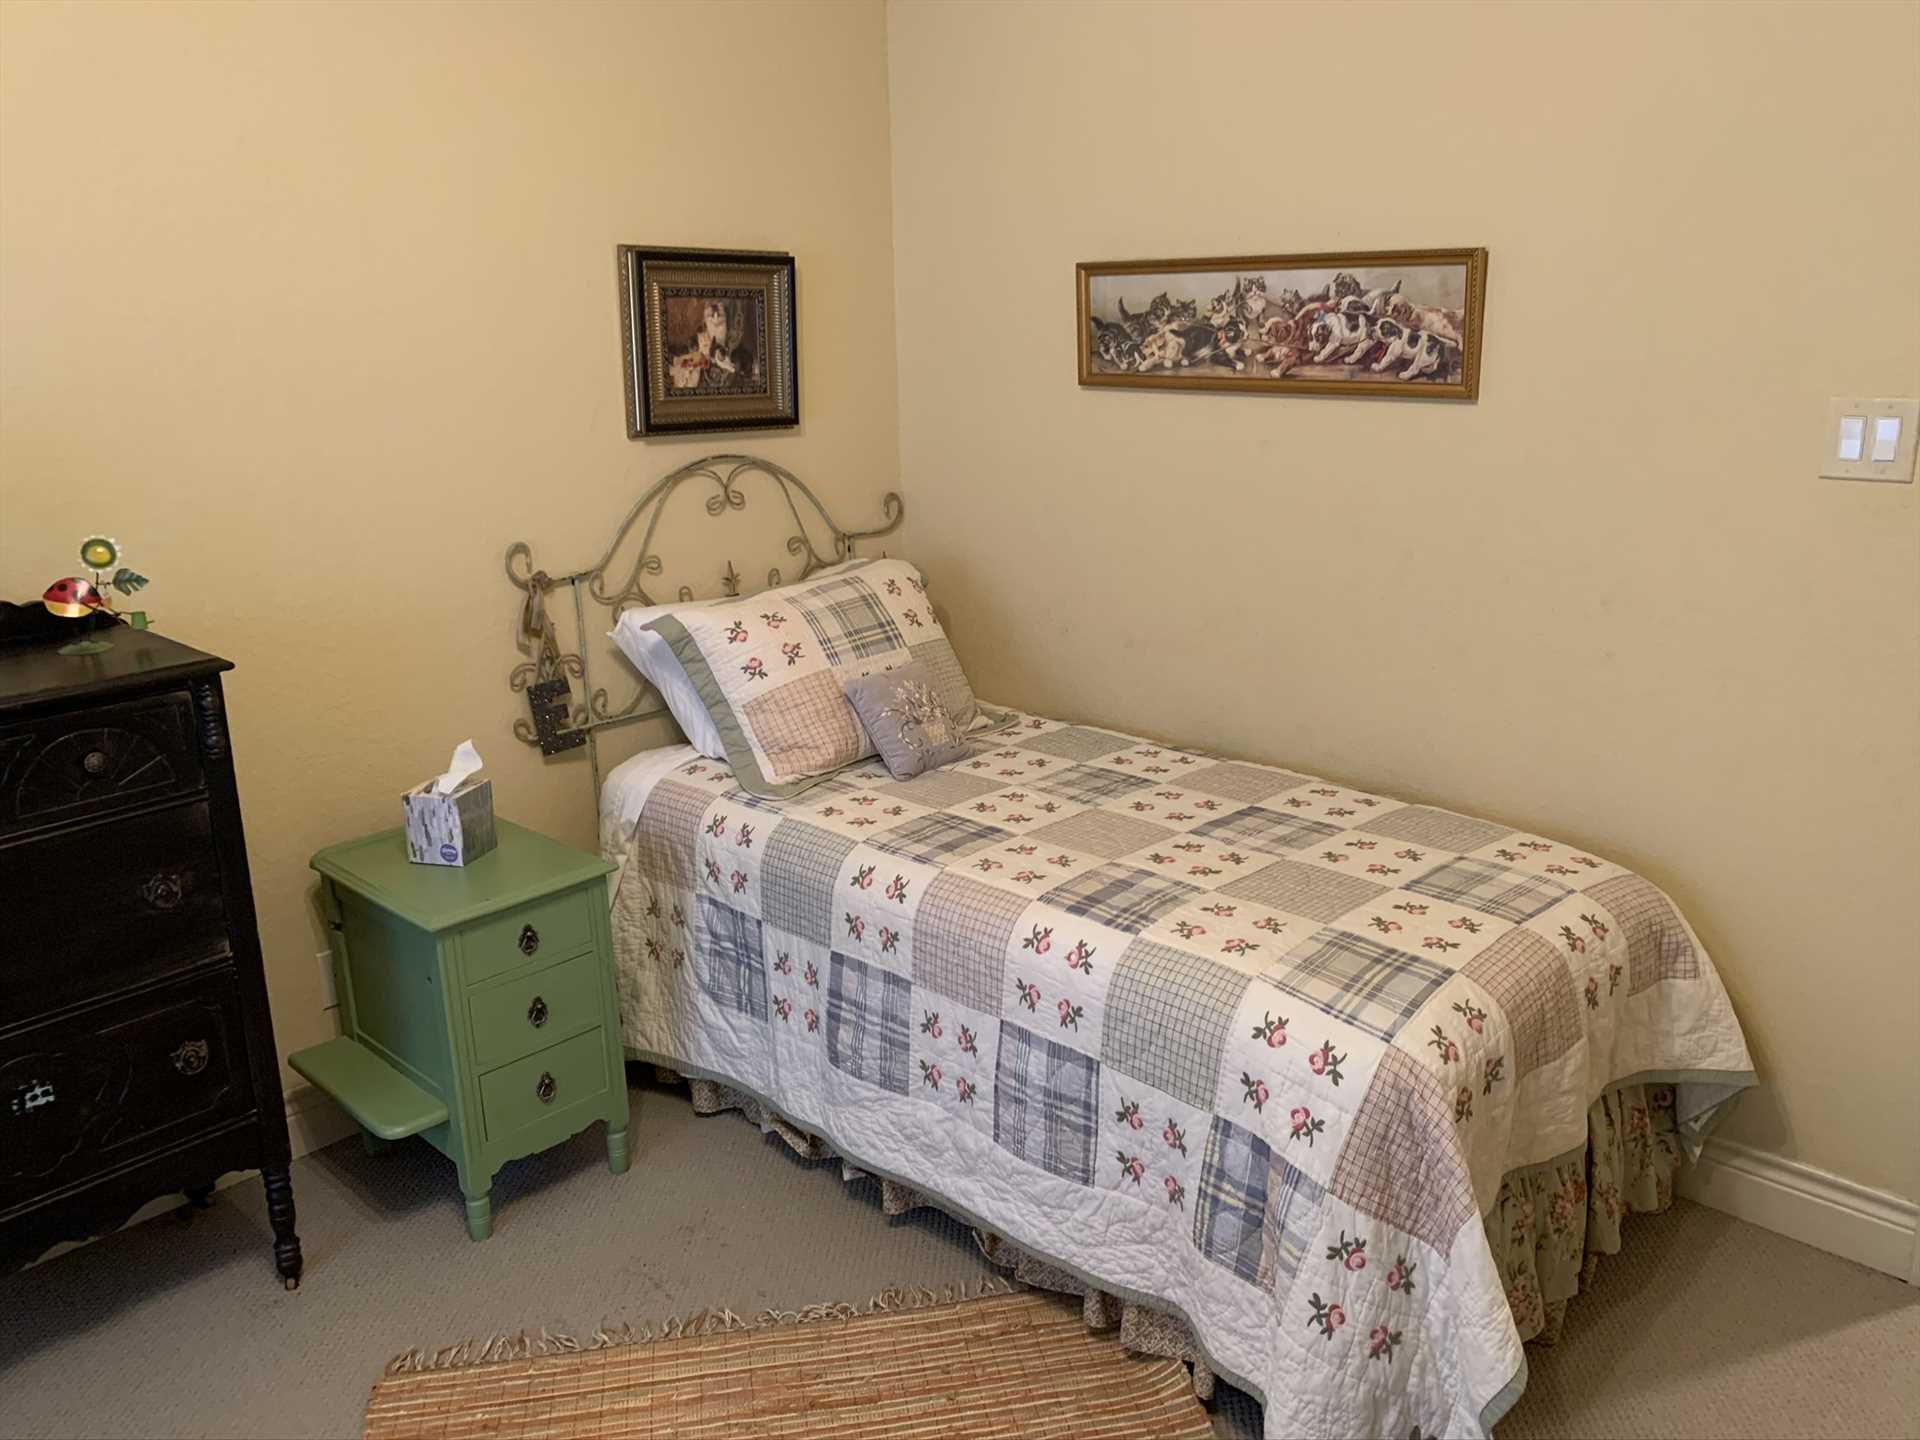                                                 All told, three bedrooms and five beds provide sweet slumber space for up to seven guests.